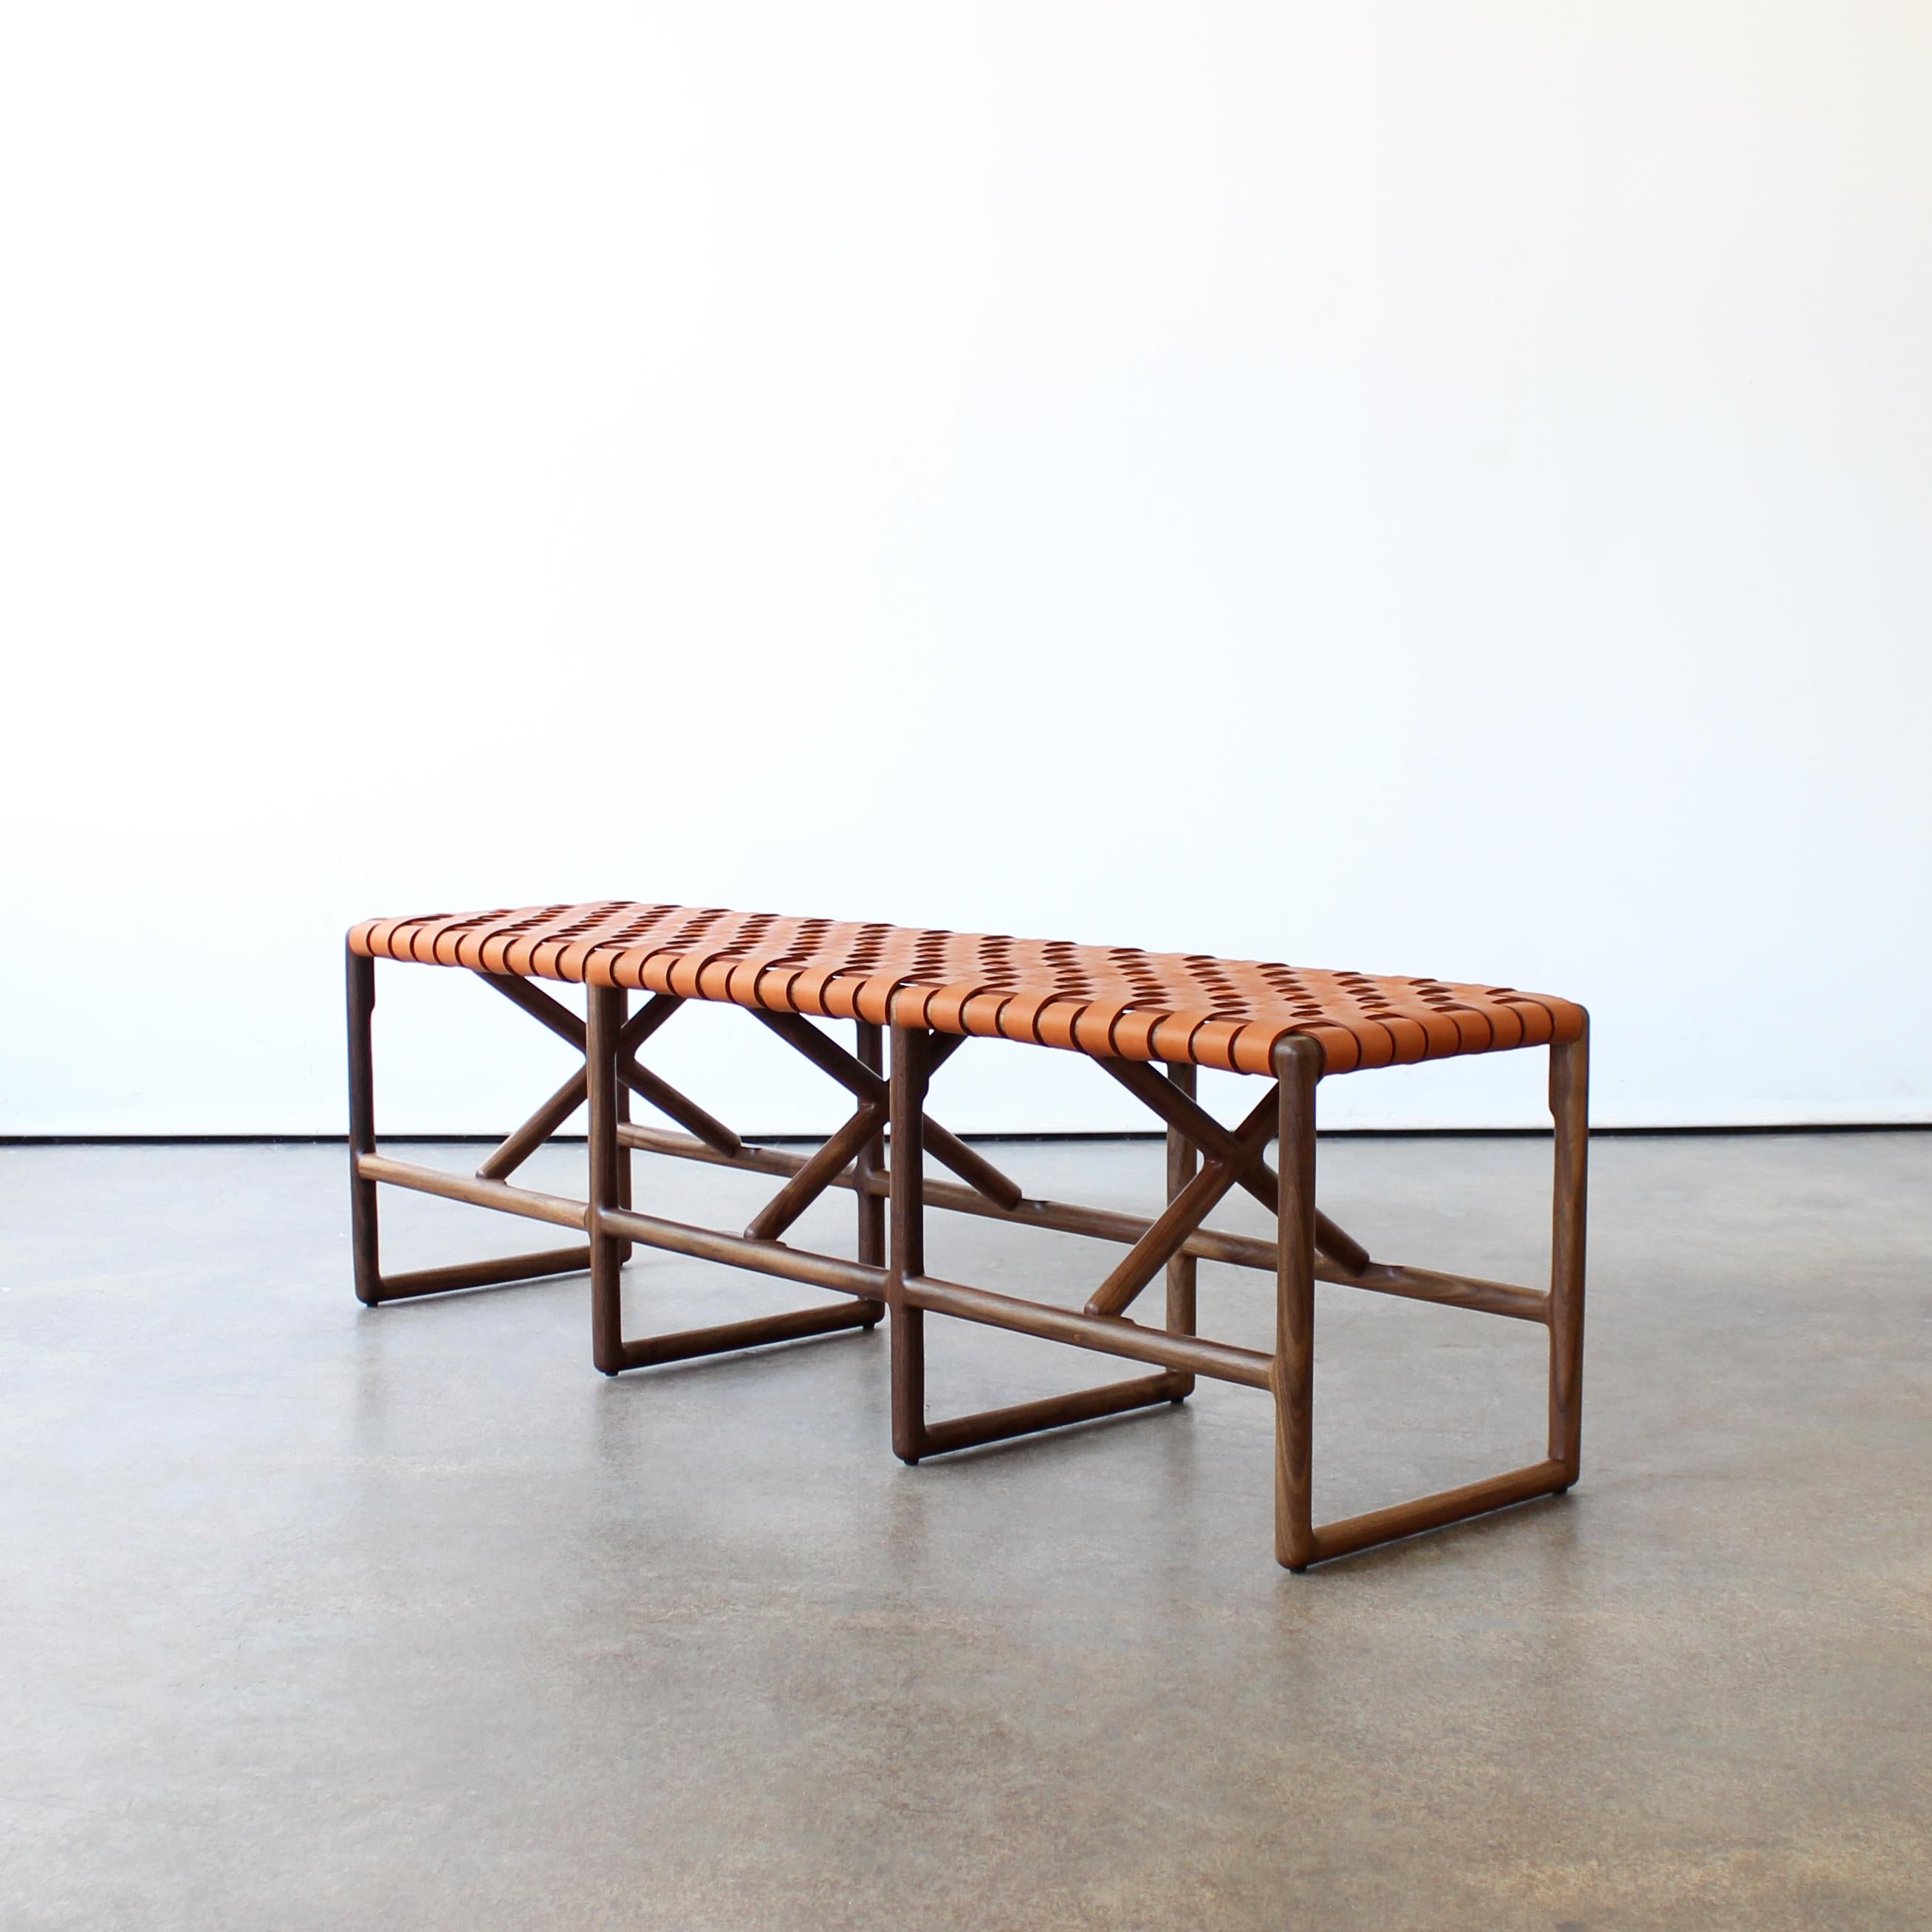 Montgomery bench by Crump and Kwash 

Hand shaped solid wood frame / hand woven vegetable tanned leather seat / hand rubbed oil finish

72” w x 16”d x 18”h

Customizations available.